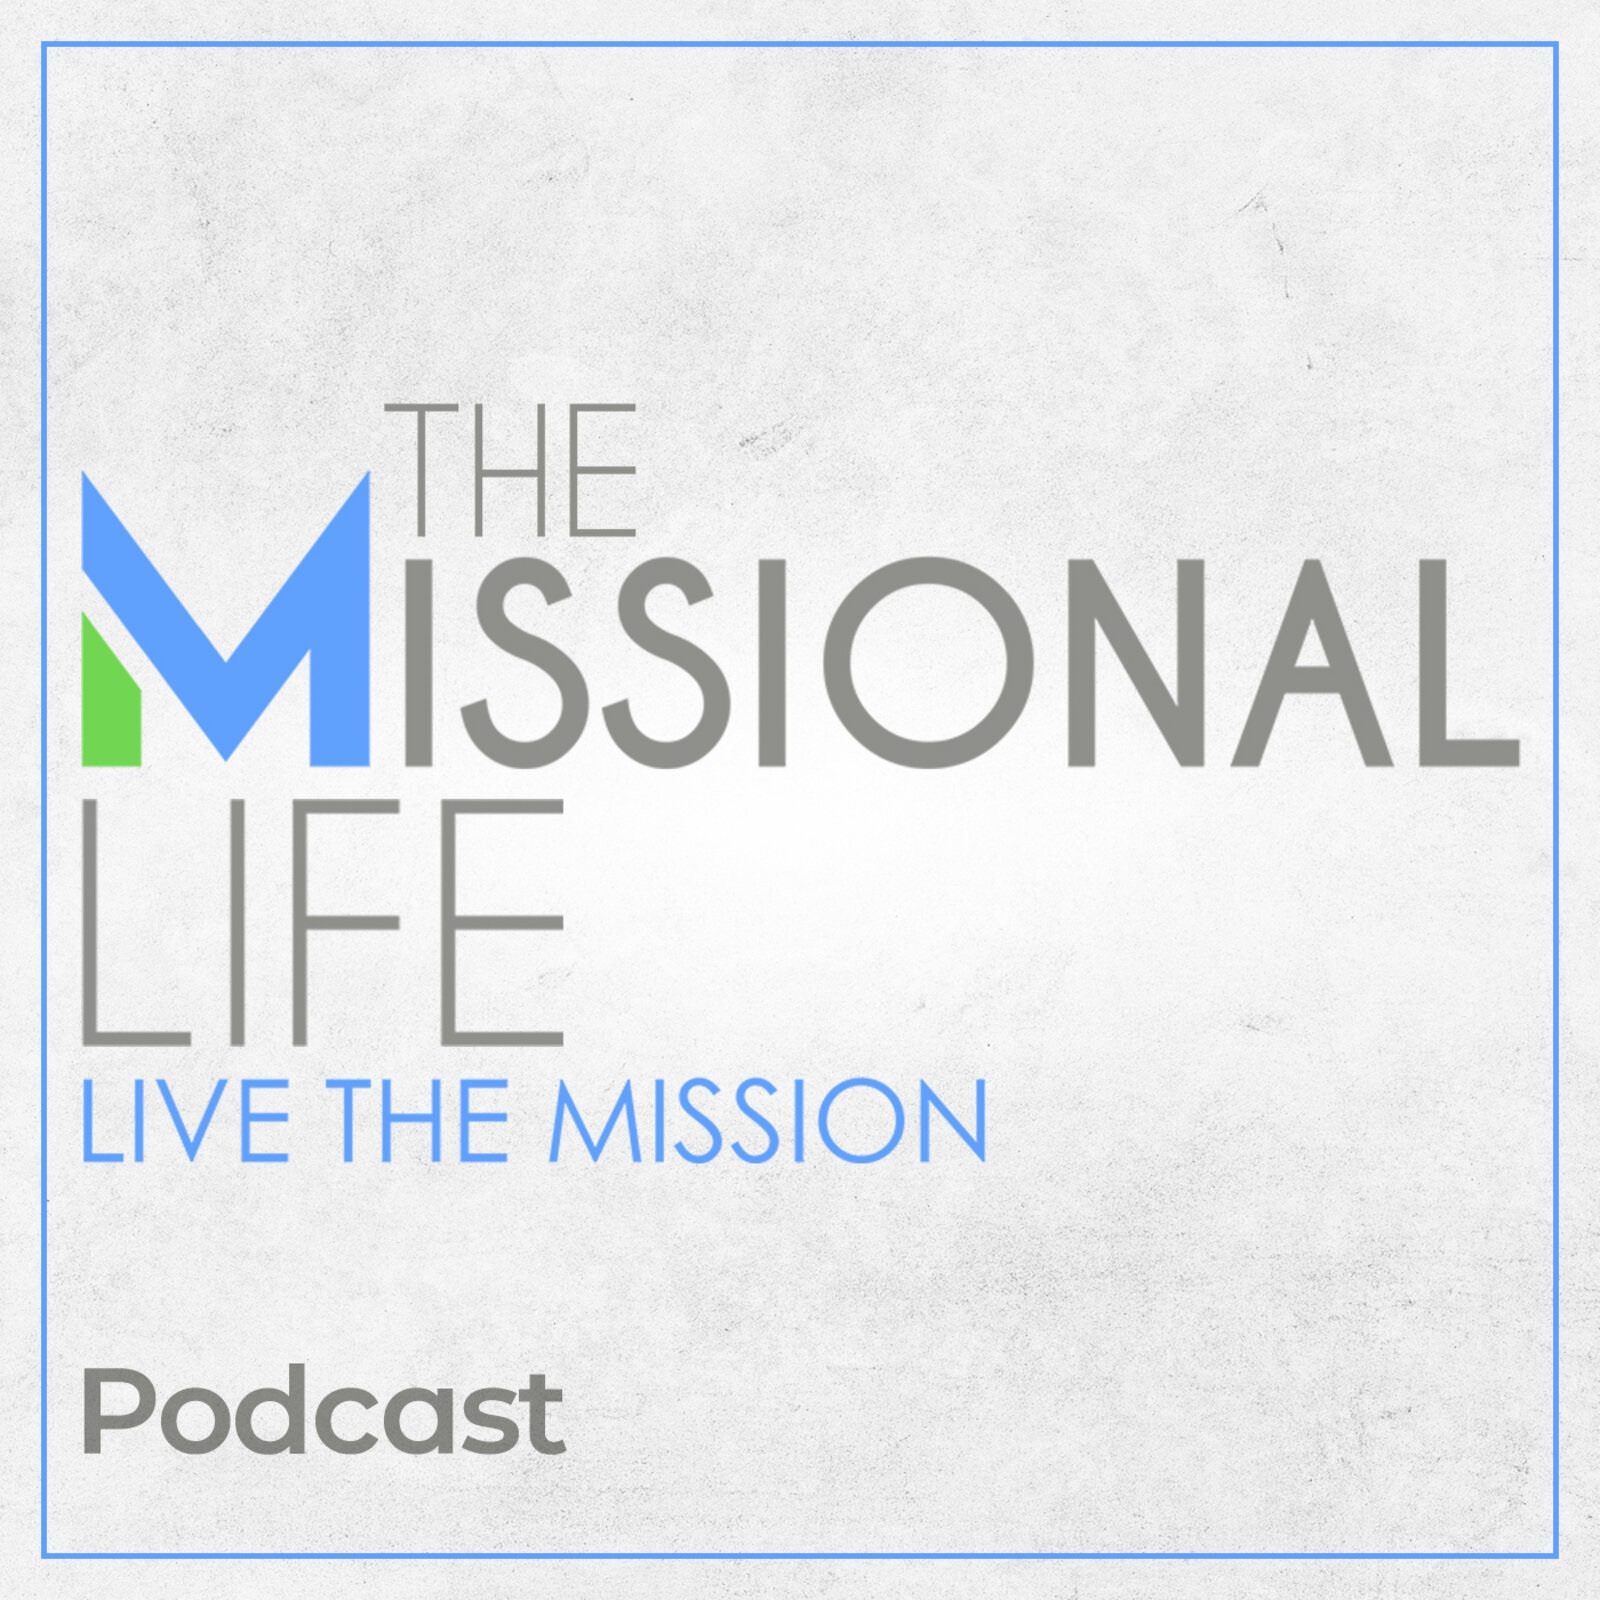 Artwork for The Missional Life Podcast